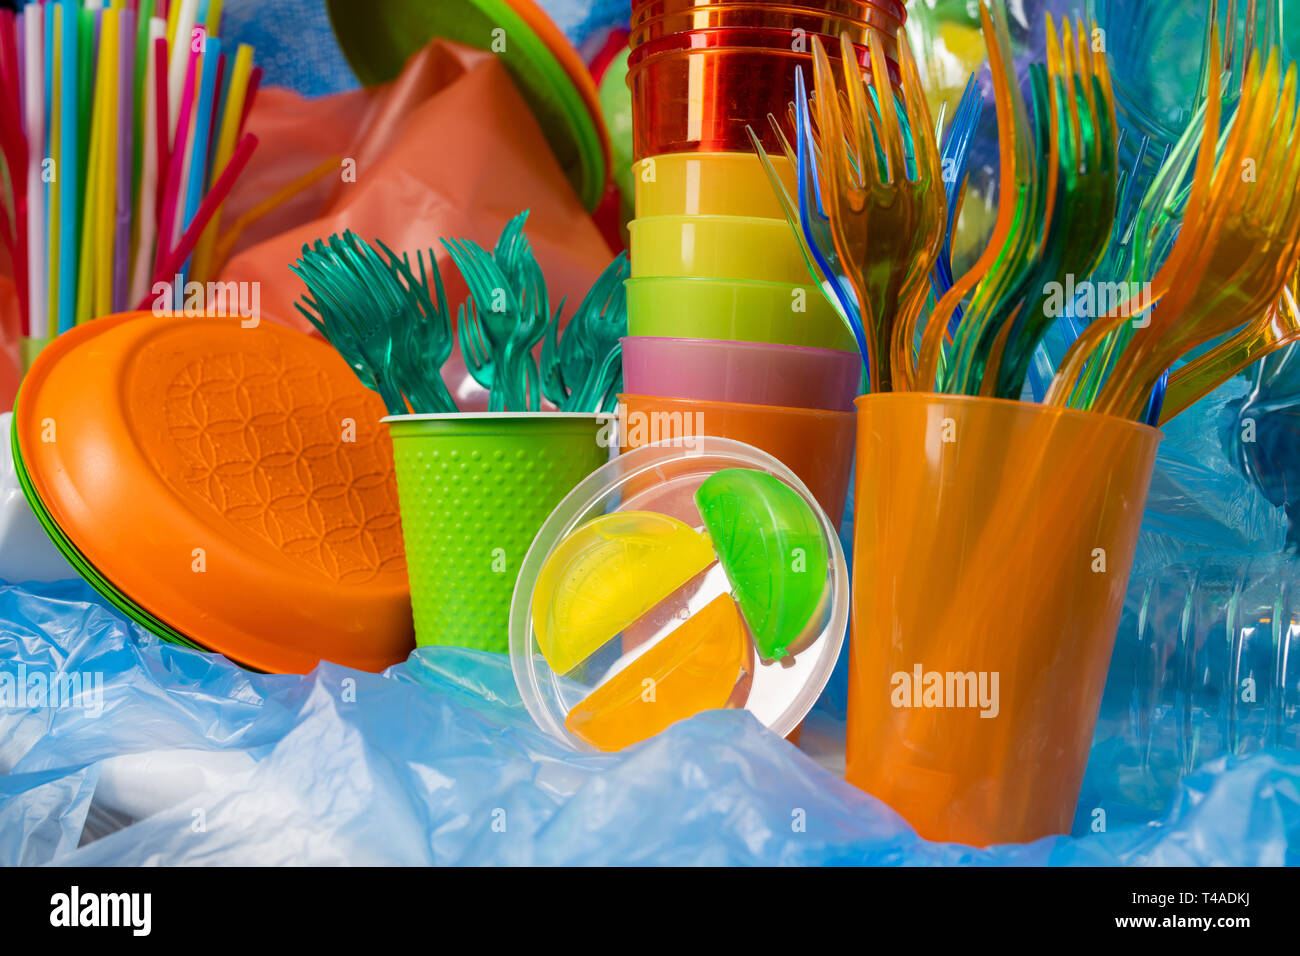 Disposable plastic cutlery of different sizes and textures Stock Photo